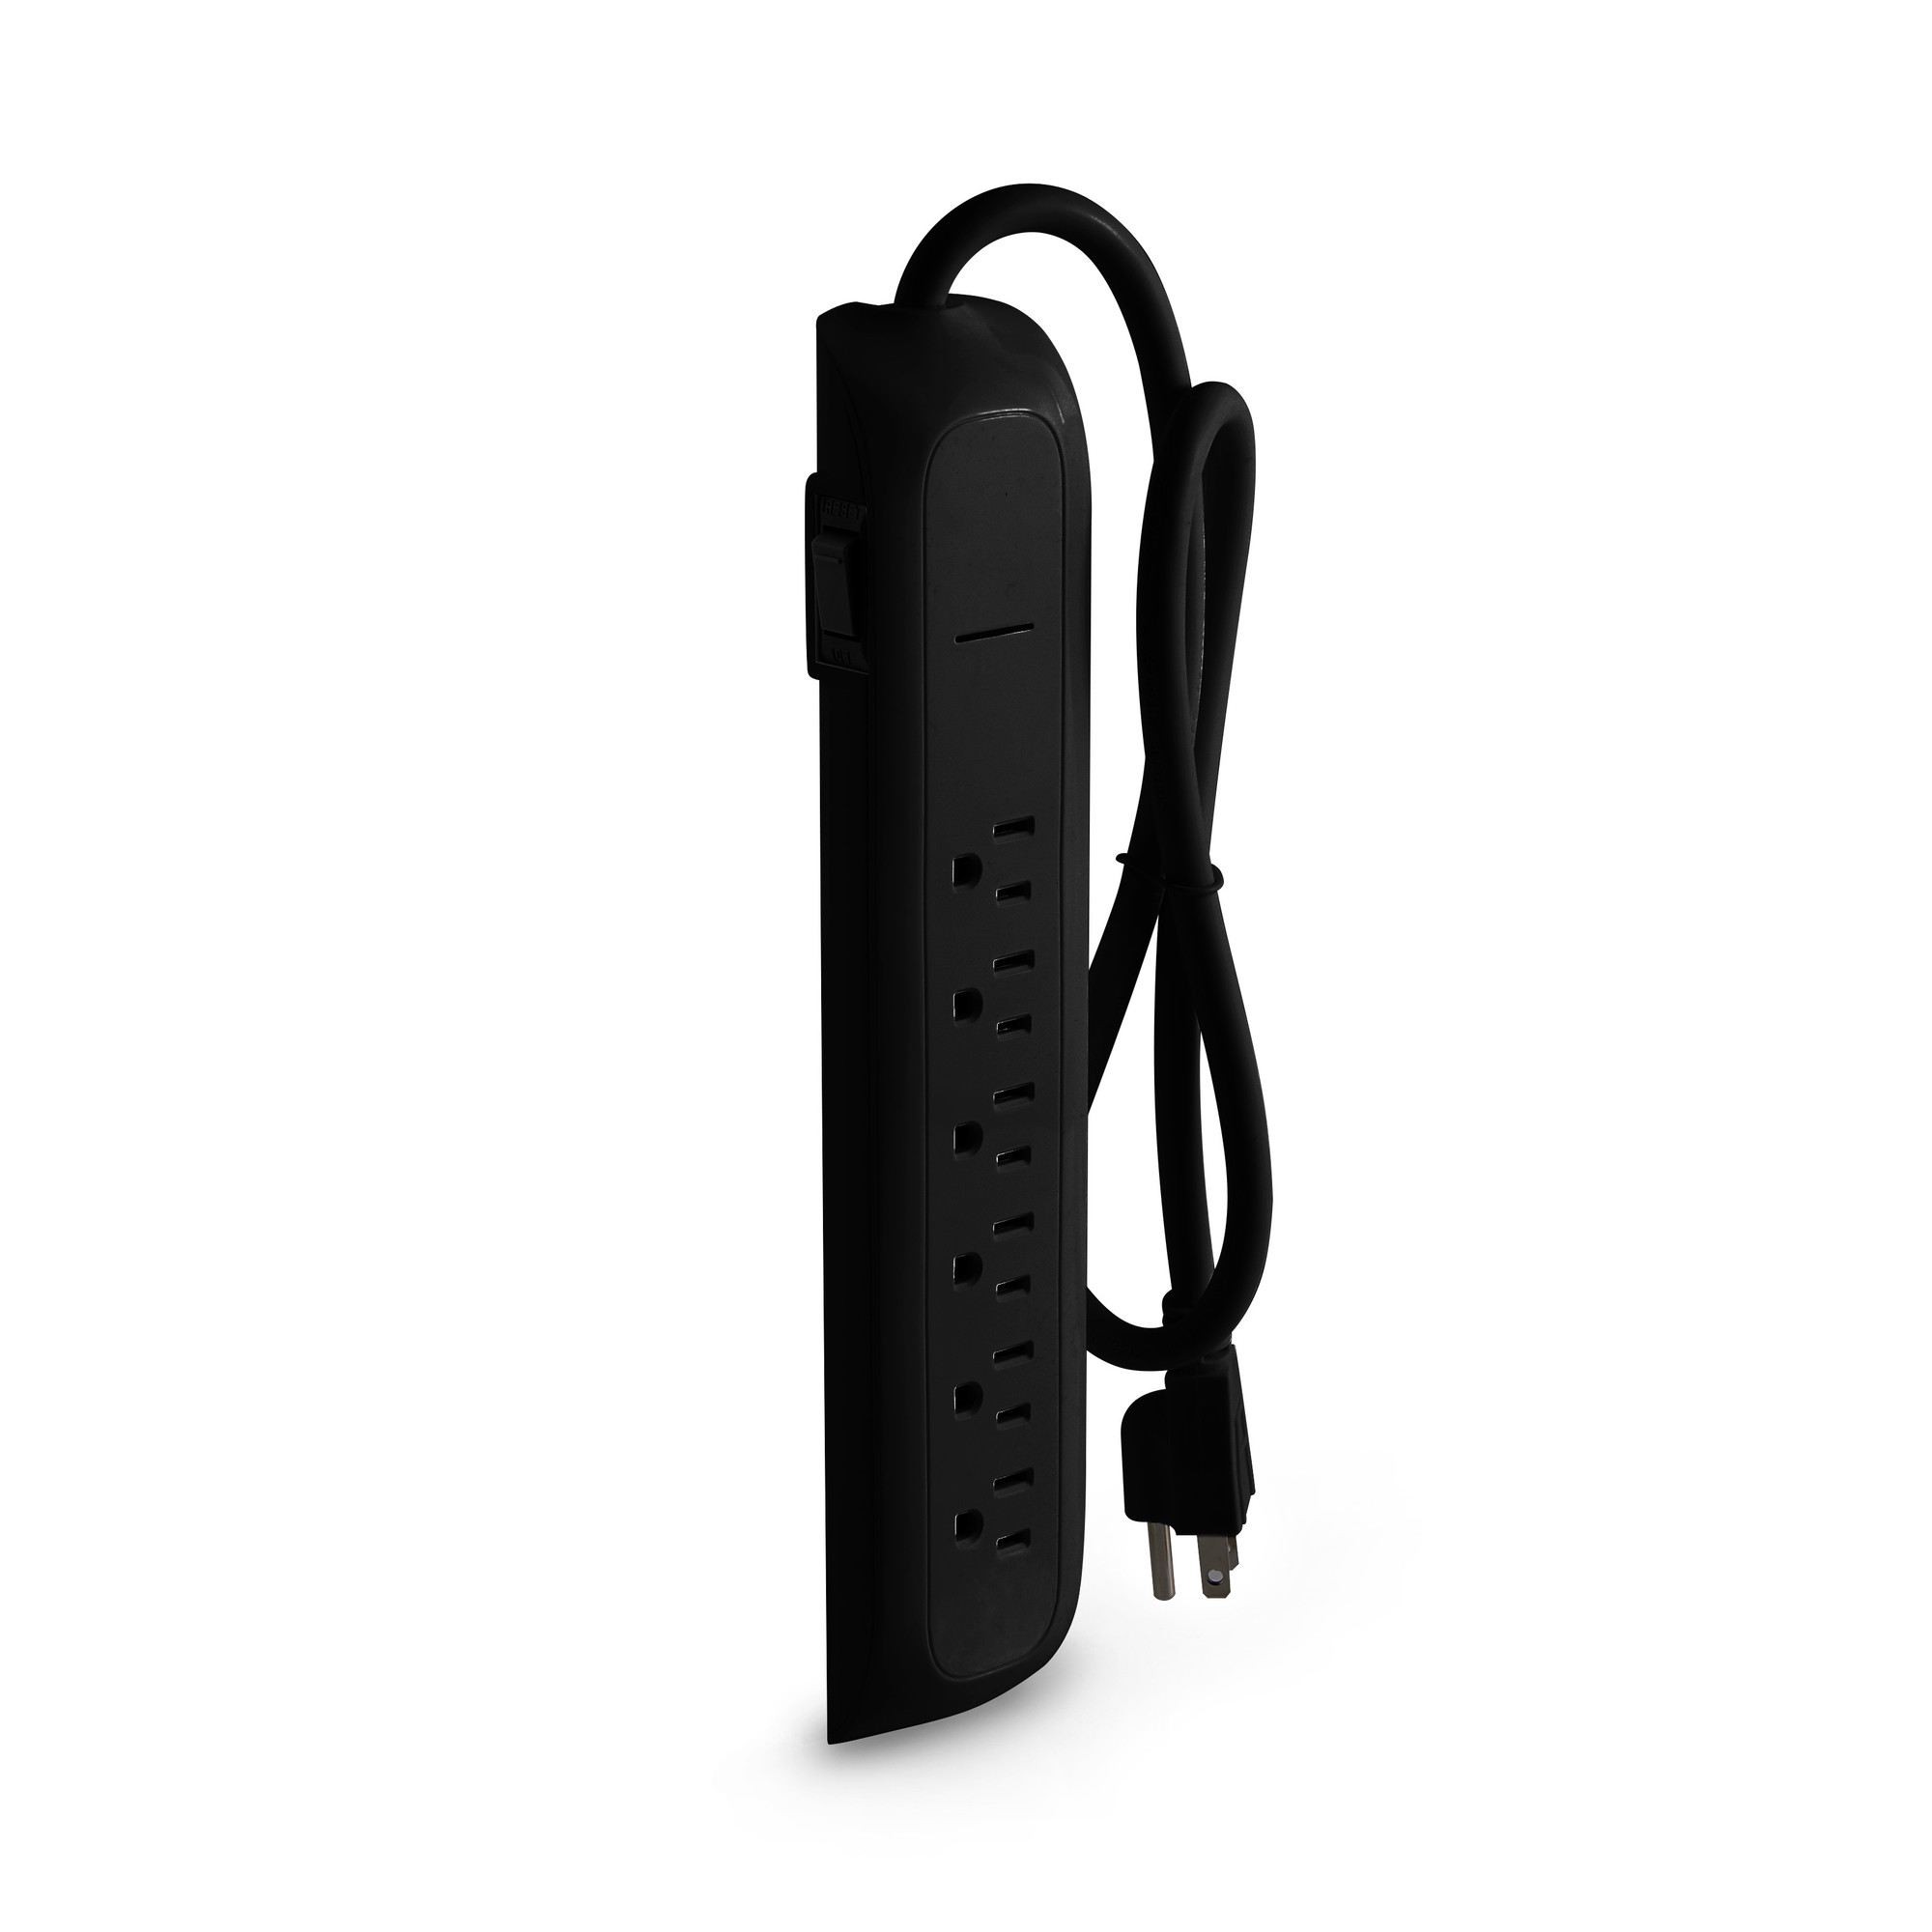 6-Outlet Power Strip, 6' Cord